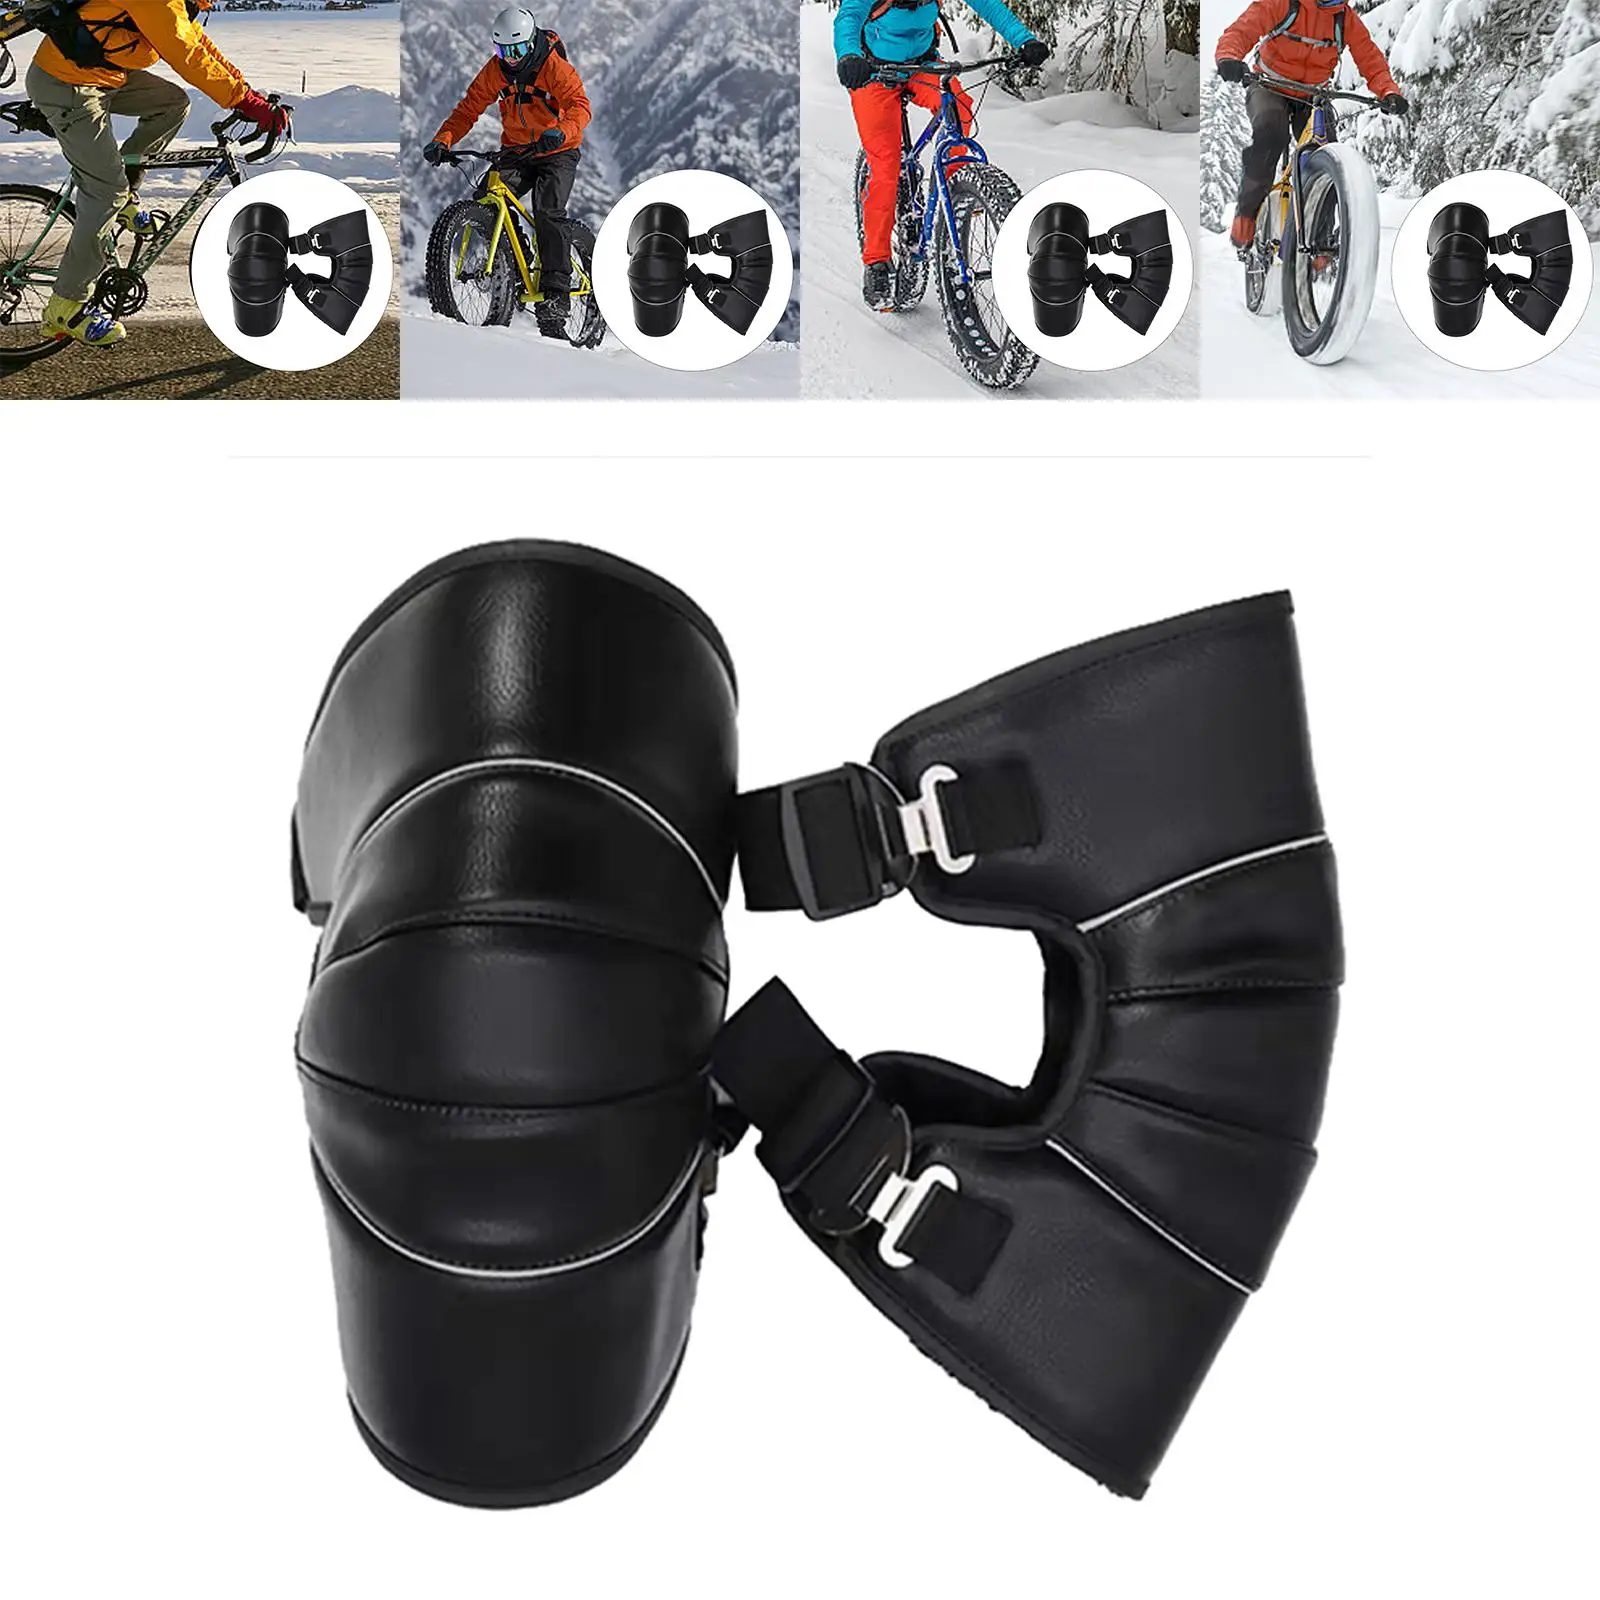 2x Adjustable Winter Knee Pads Leggings Motorcycles Protective Gear Leg Sleeve Shin Guards for Women Scooter Autumn Adults Ski